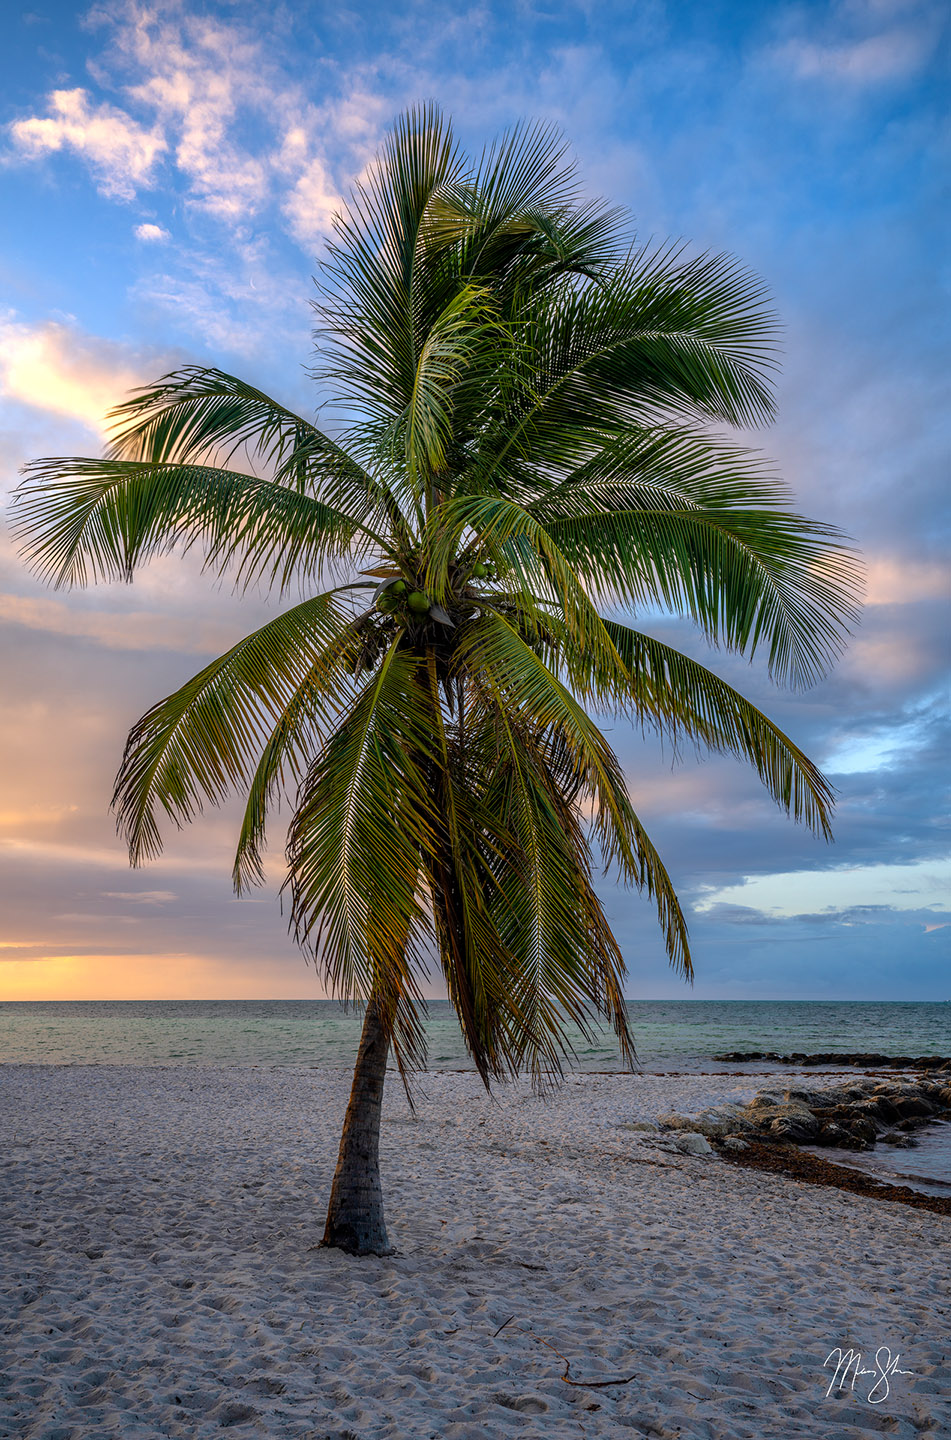 A lone palm tree stands witness to a beautiful sunrise on Smathers Beach in Key West, Florida.